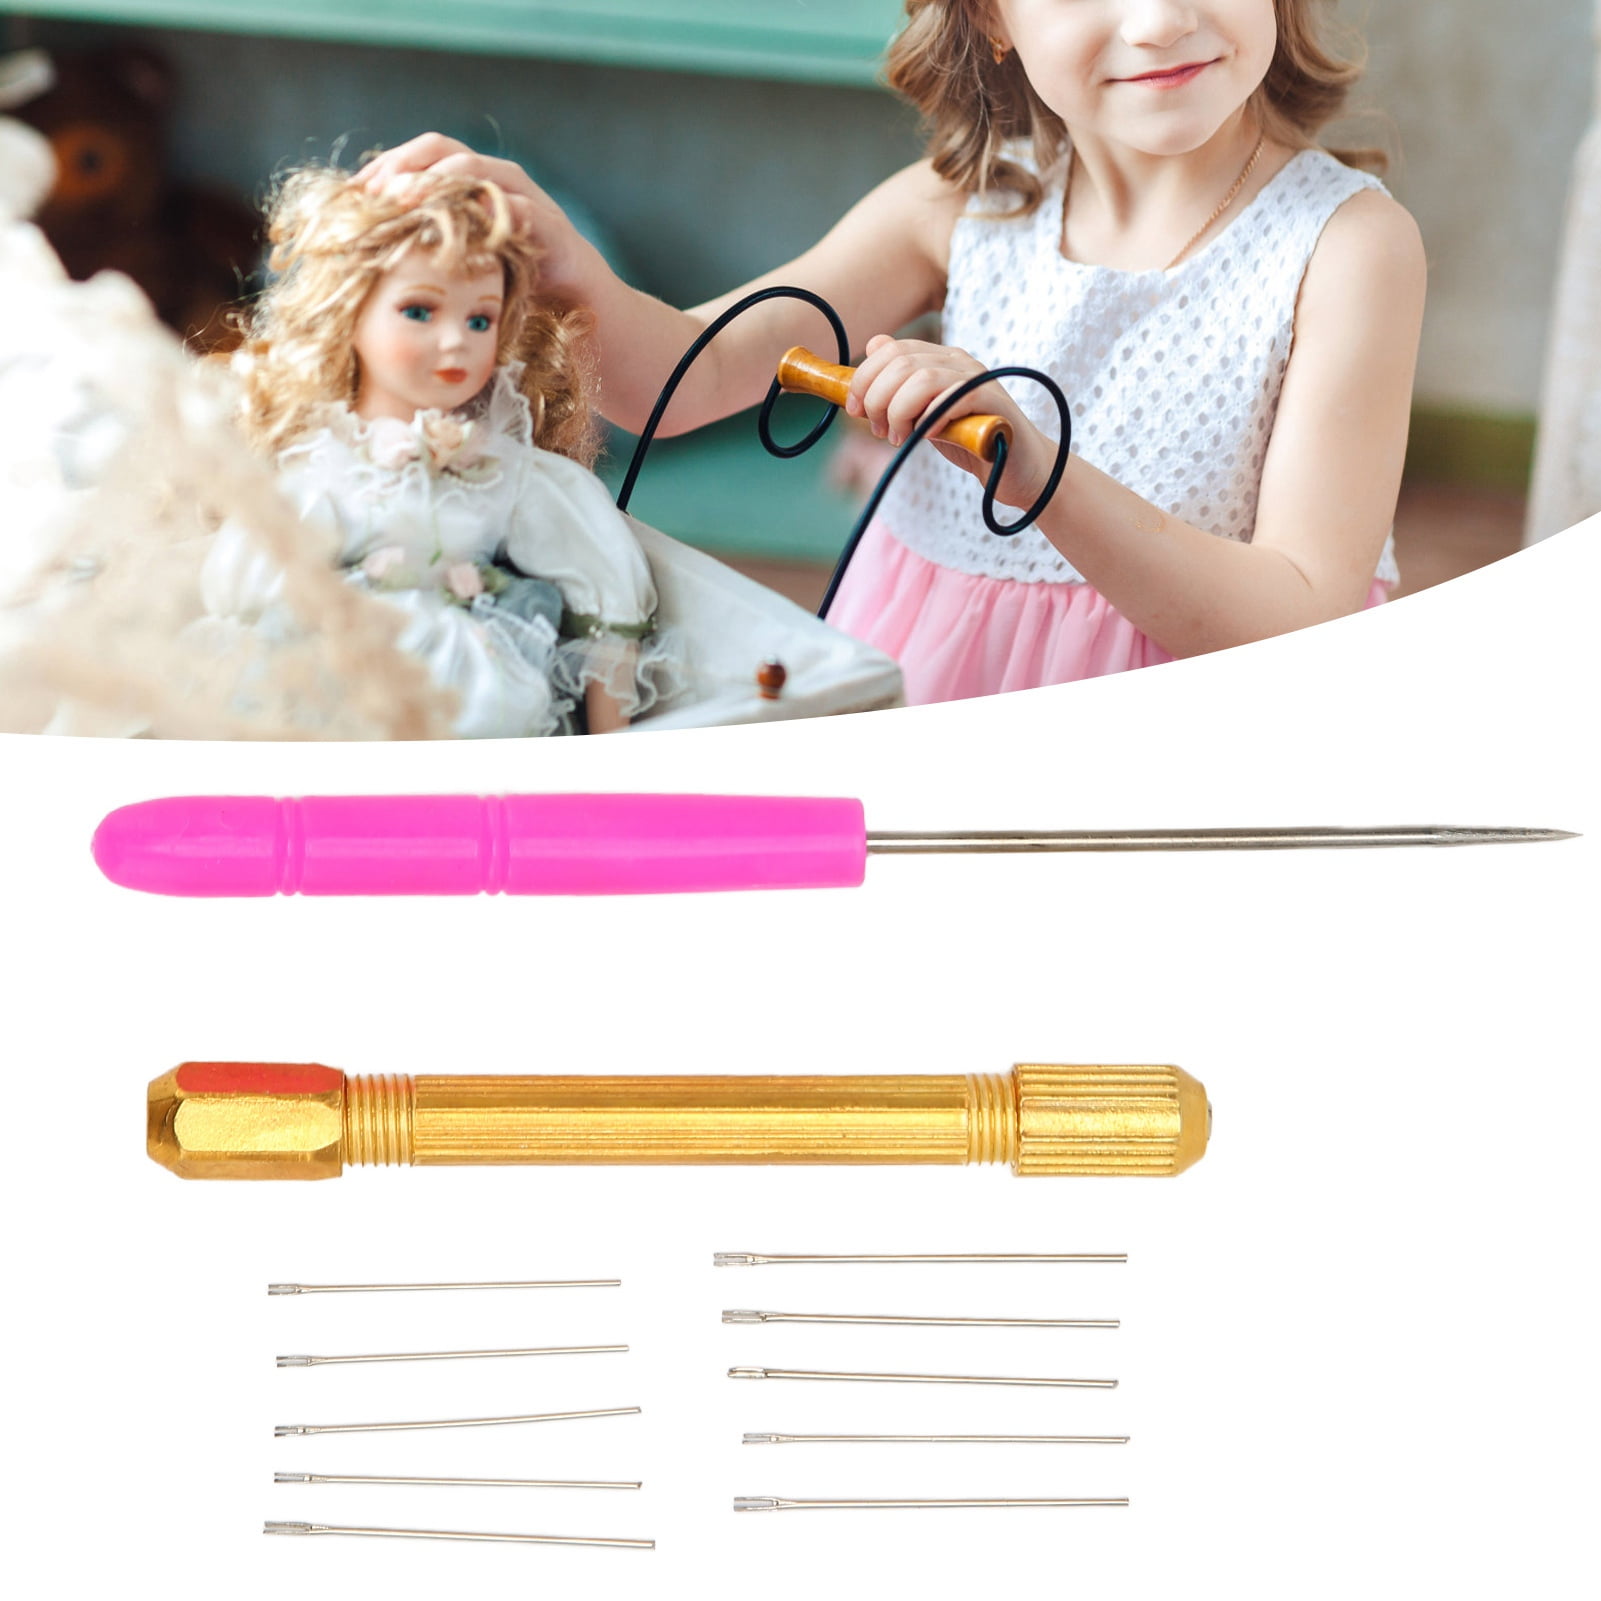 10pcs Doll Hair Rooting Holders Reroot Rehair Tools for Girls Doll